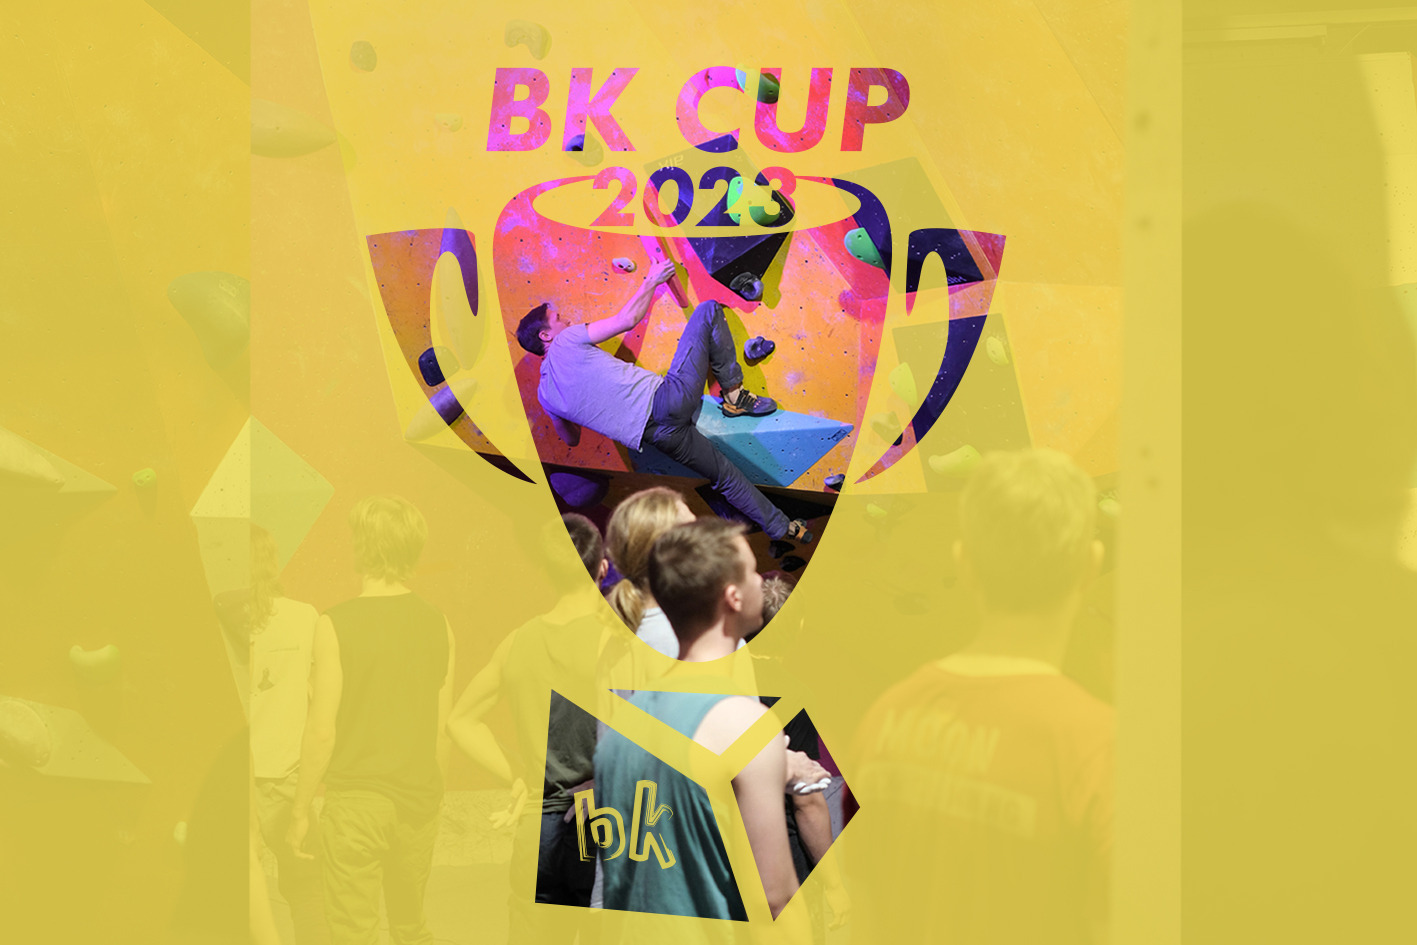 BK CUP 2023